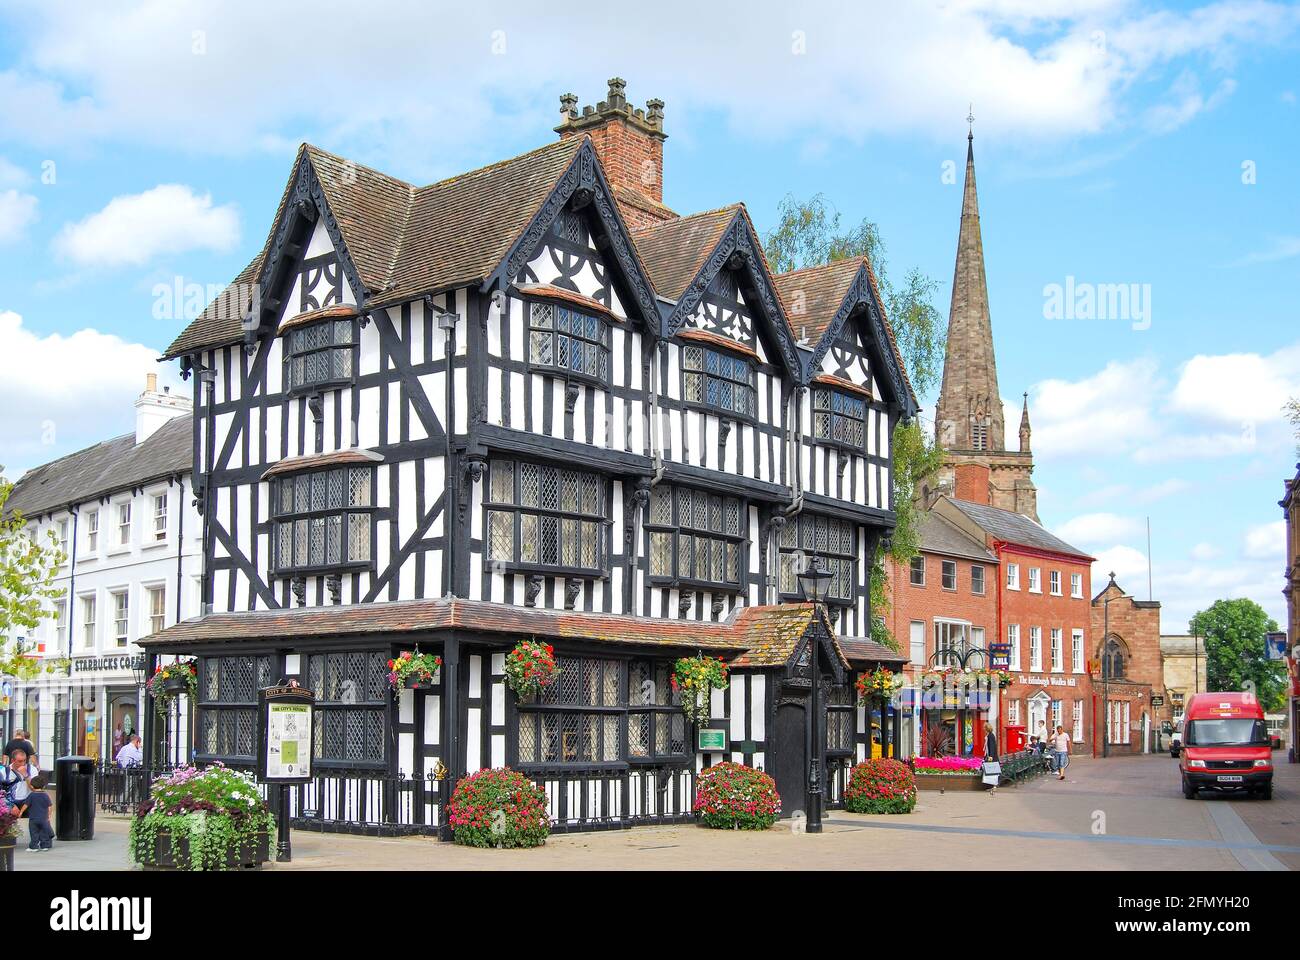 17th Century The Old House, High Town, Hereford, Herefordshire, England, United Kingdom Stock Photo